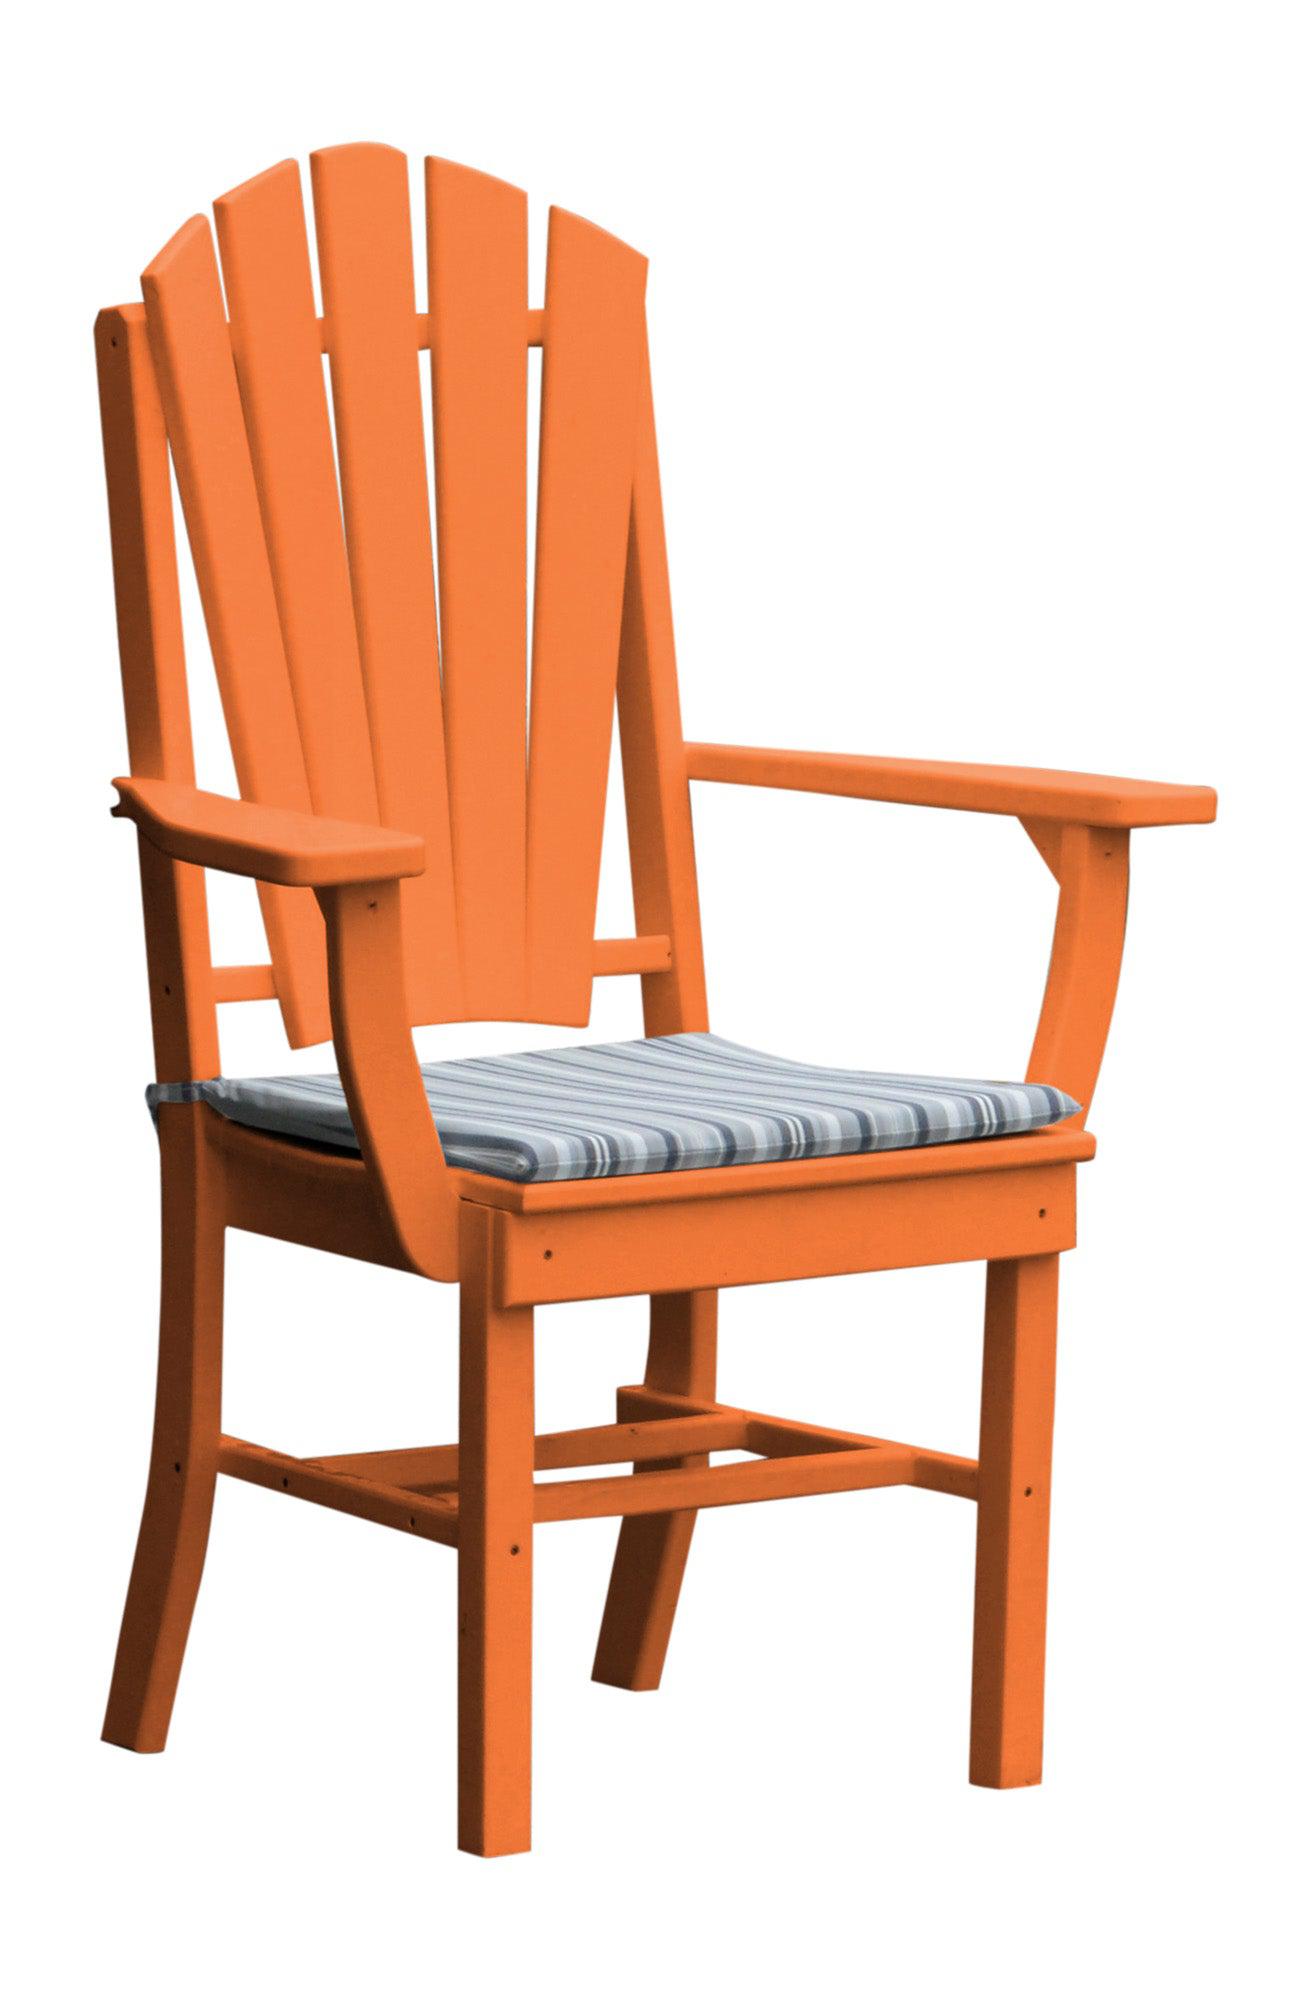 A&L Furniture Company Recycled Plastic Adirondack Dining Chair w/Arms - LEAD TIME TO SHIP 10 BUSINESS DAYS